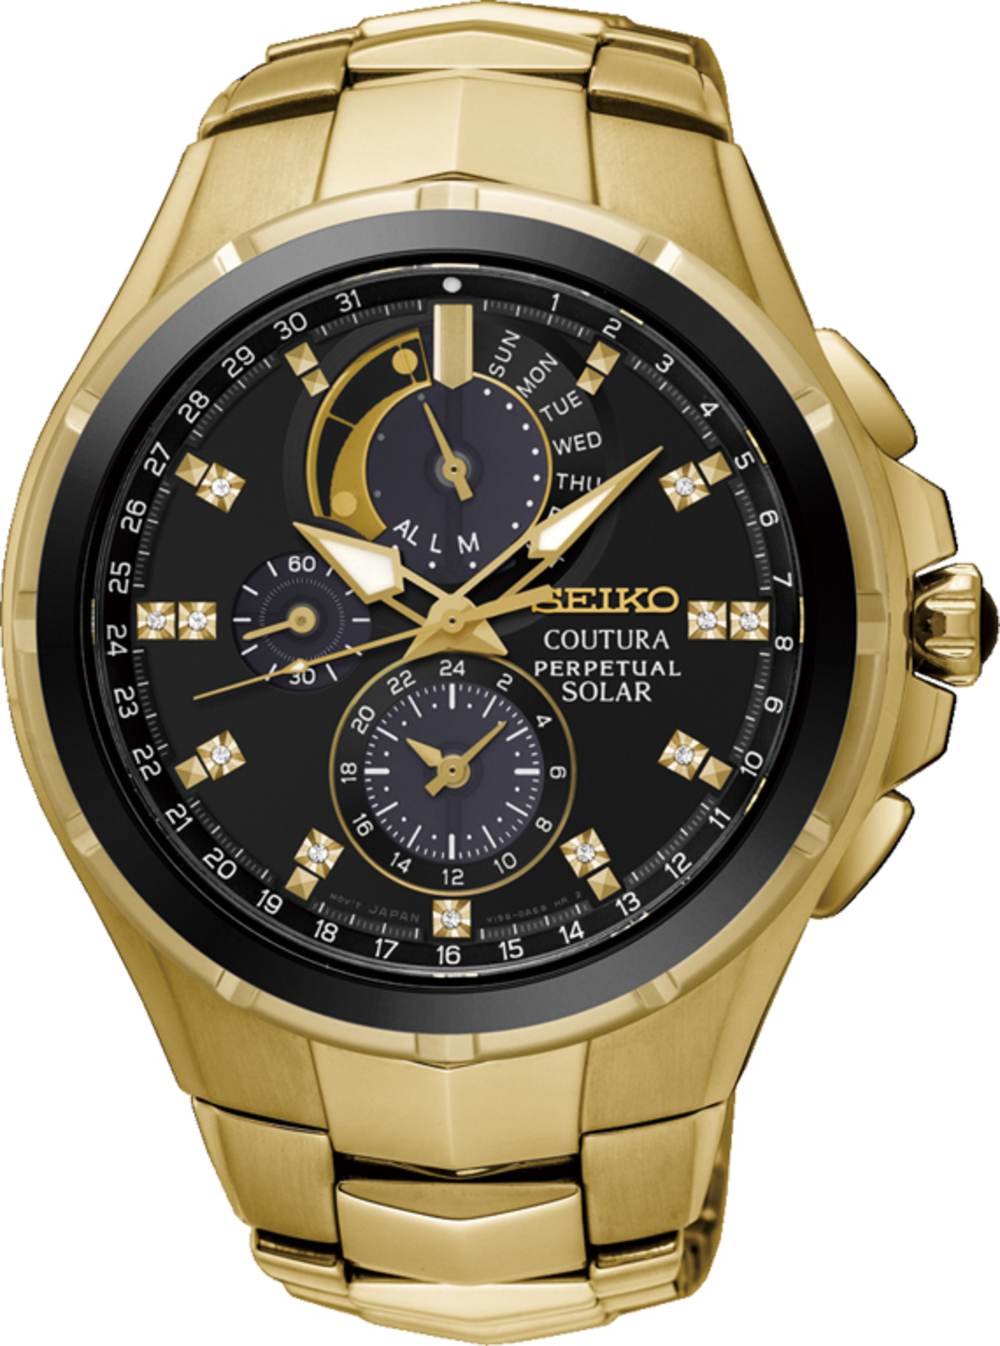 Seiko Men's Coutura Watch in Gold | Prouds